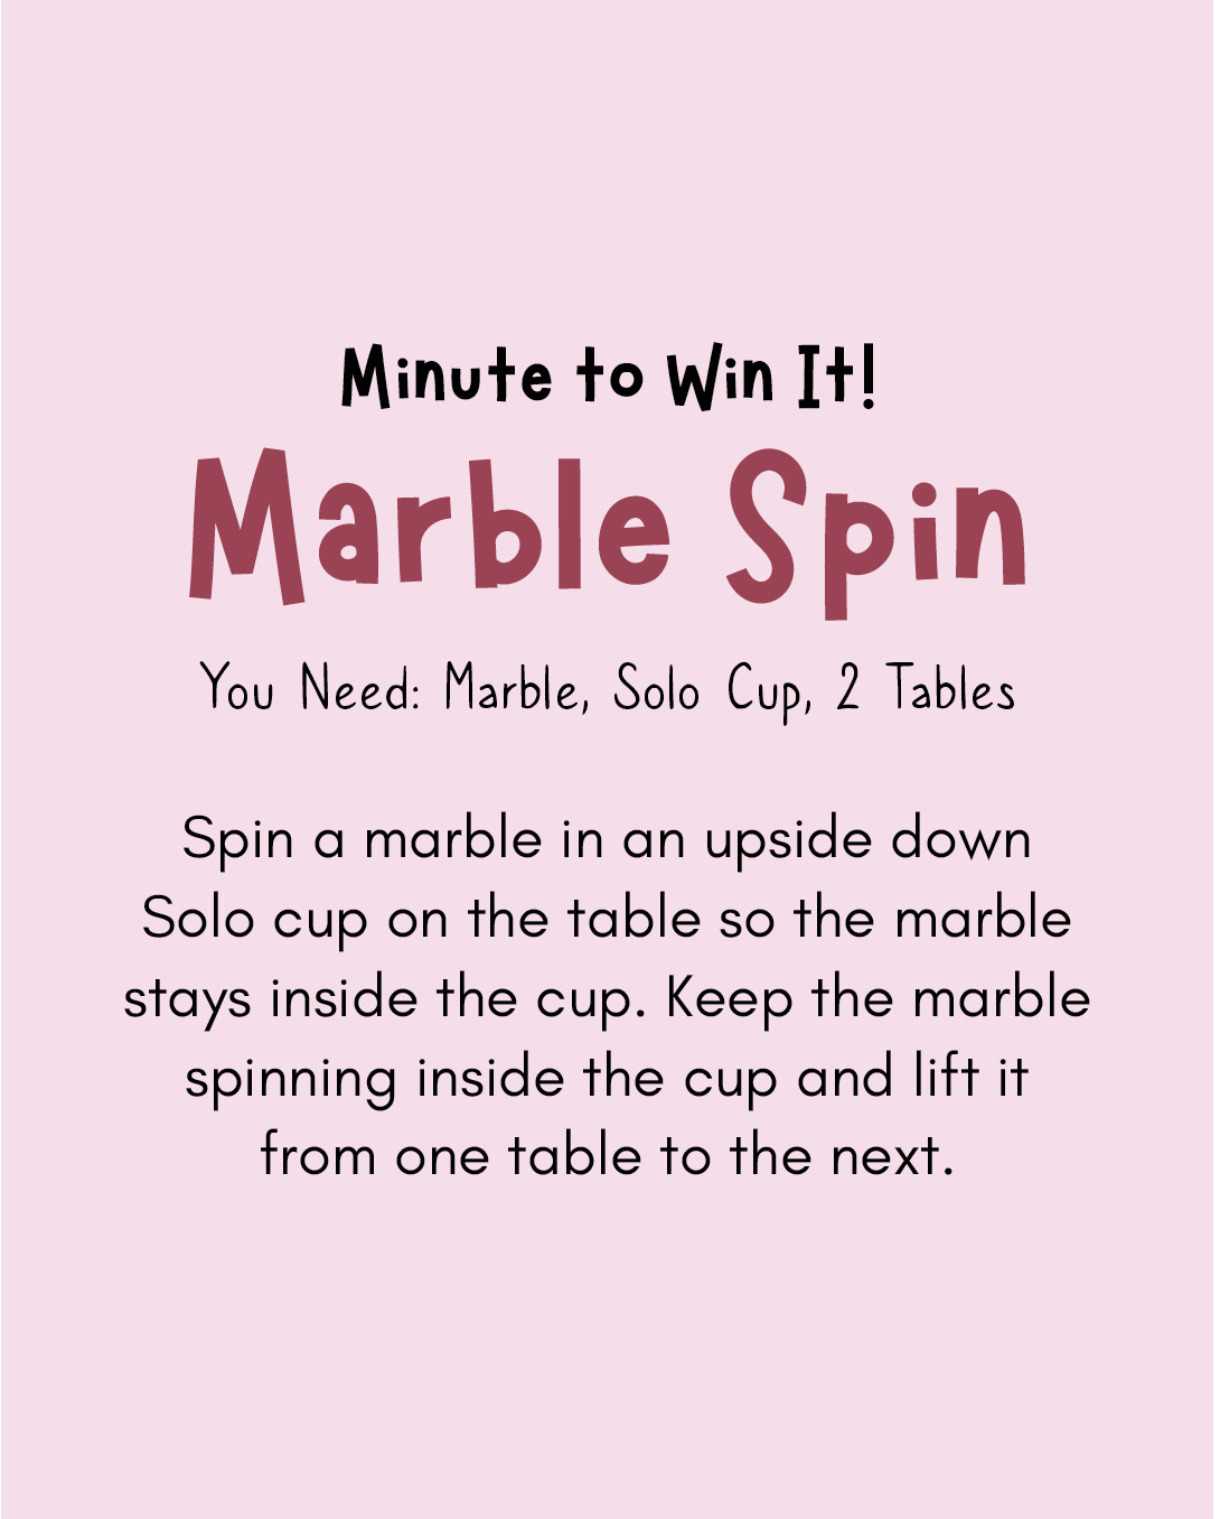 Minute to Win It Games for Families: Marble Spin